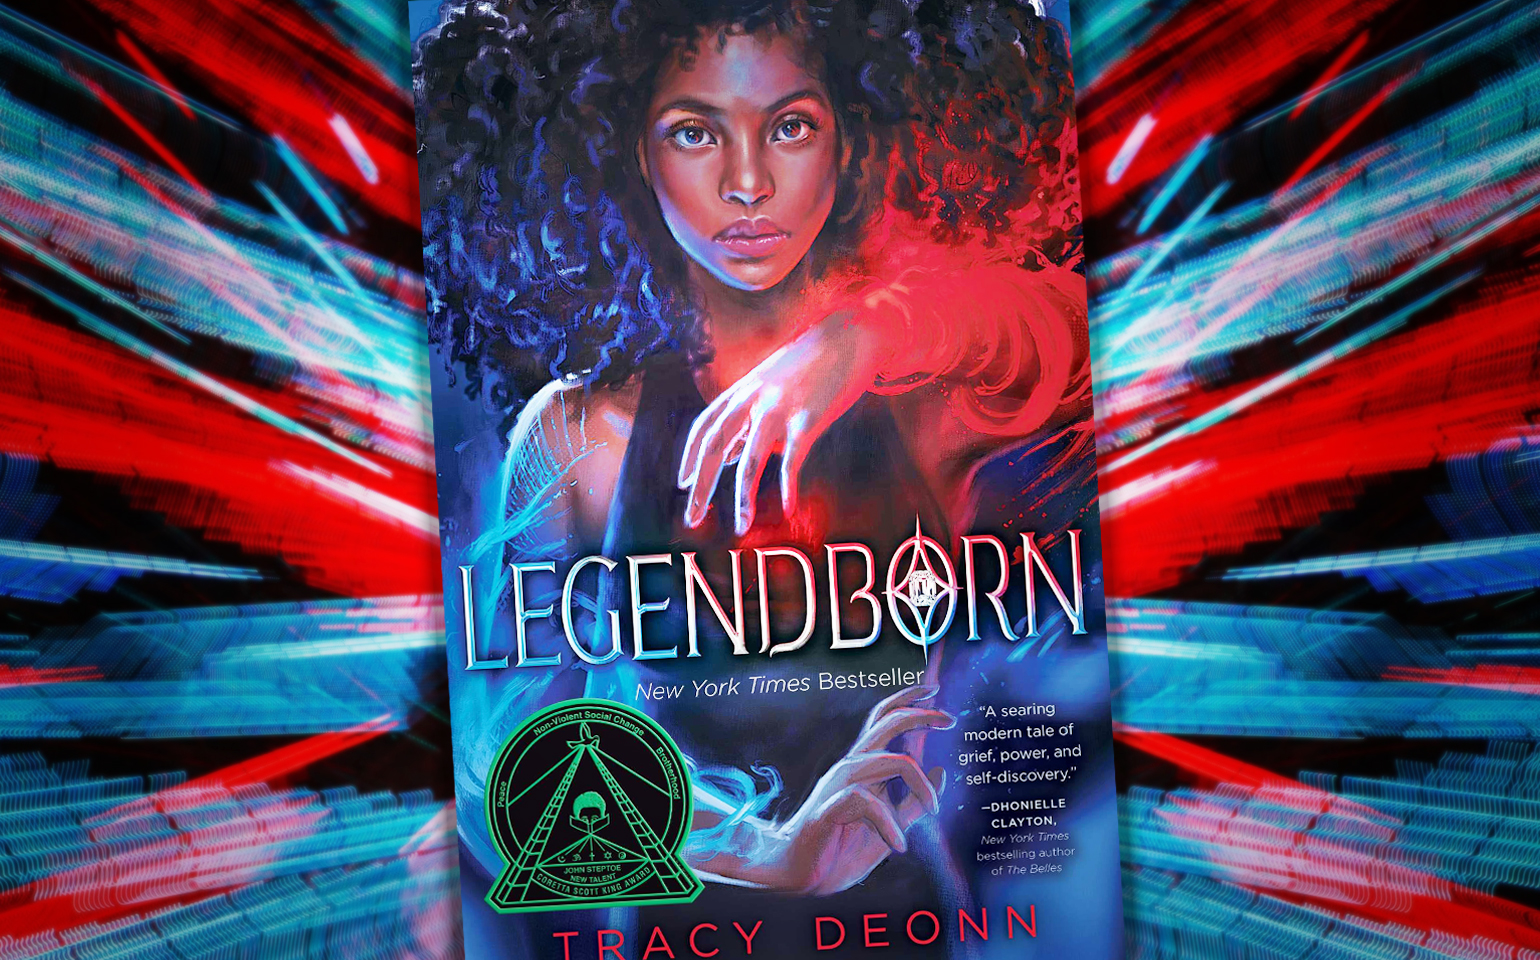 The cover of Tracy Deonn's Legendborn is shown, with a woman's glowing arm appearing in full view.